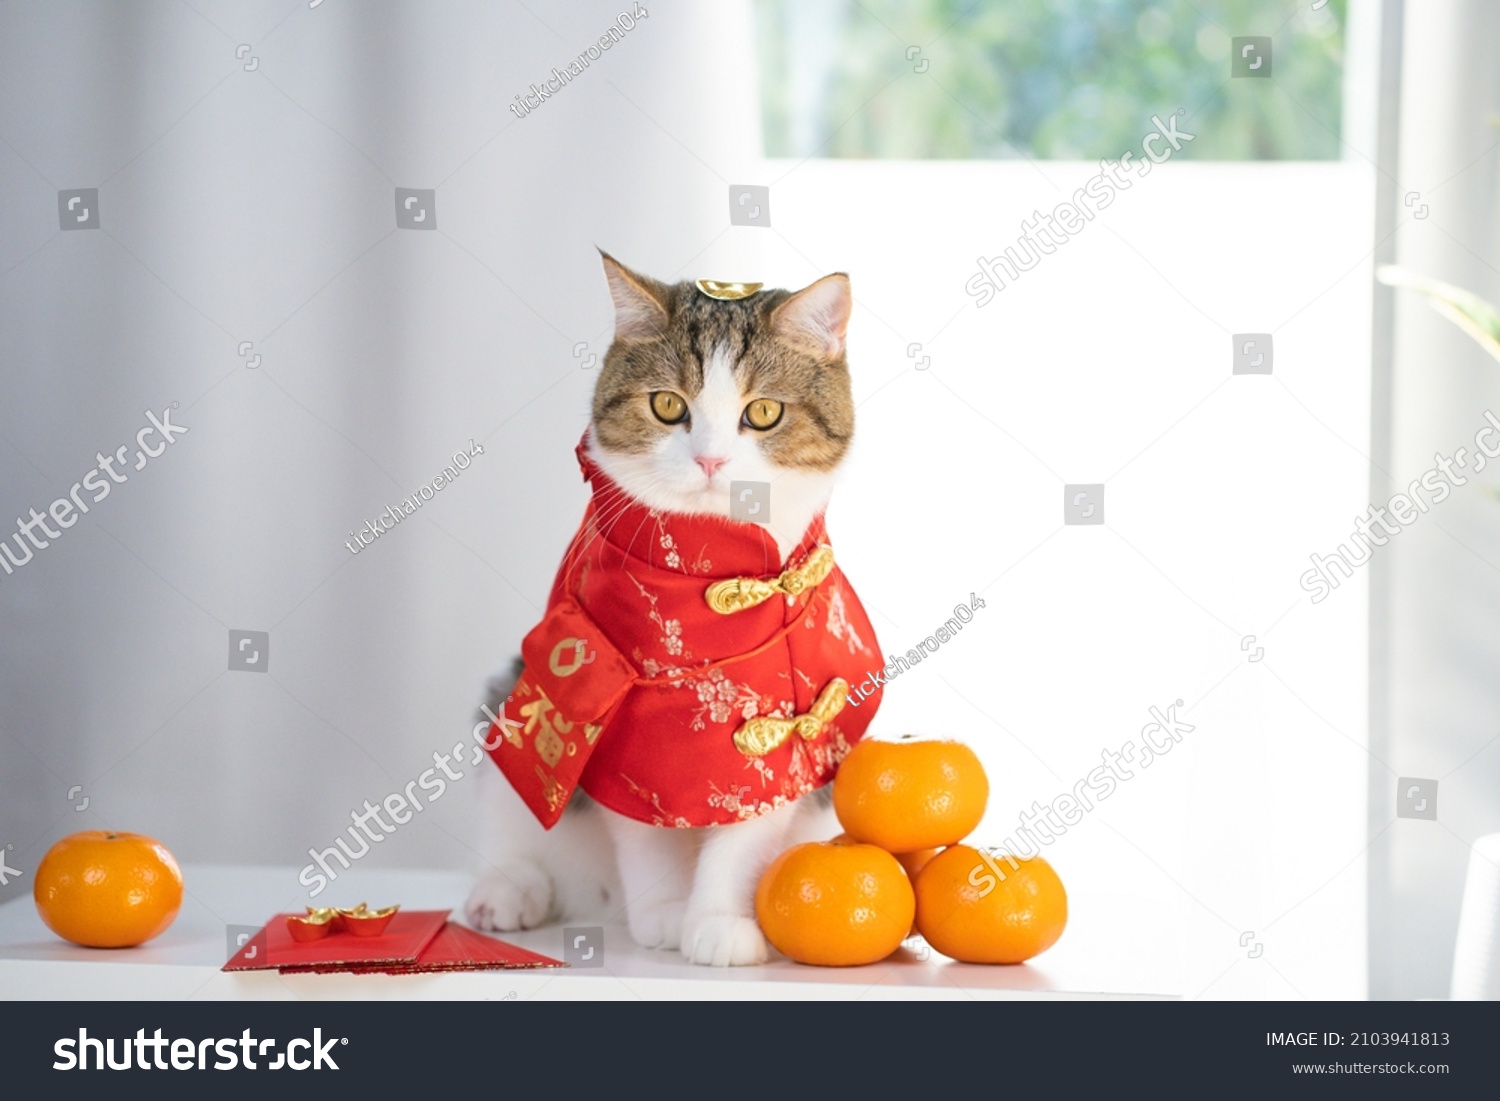 chinese new year concept with cat wearing red chinese traditional cloth sit with red envelope orange and gold on table #2103941813